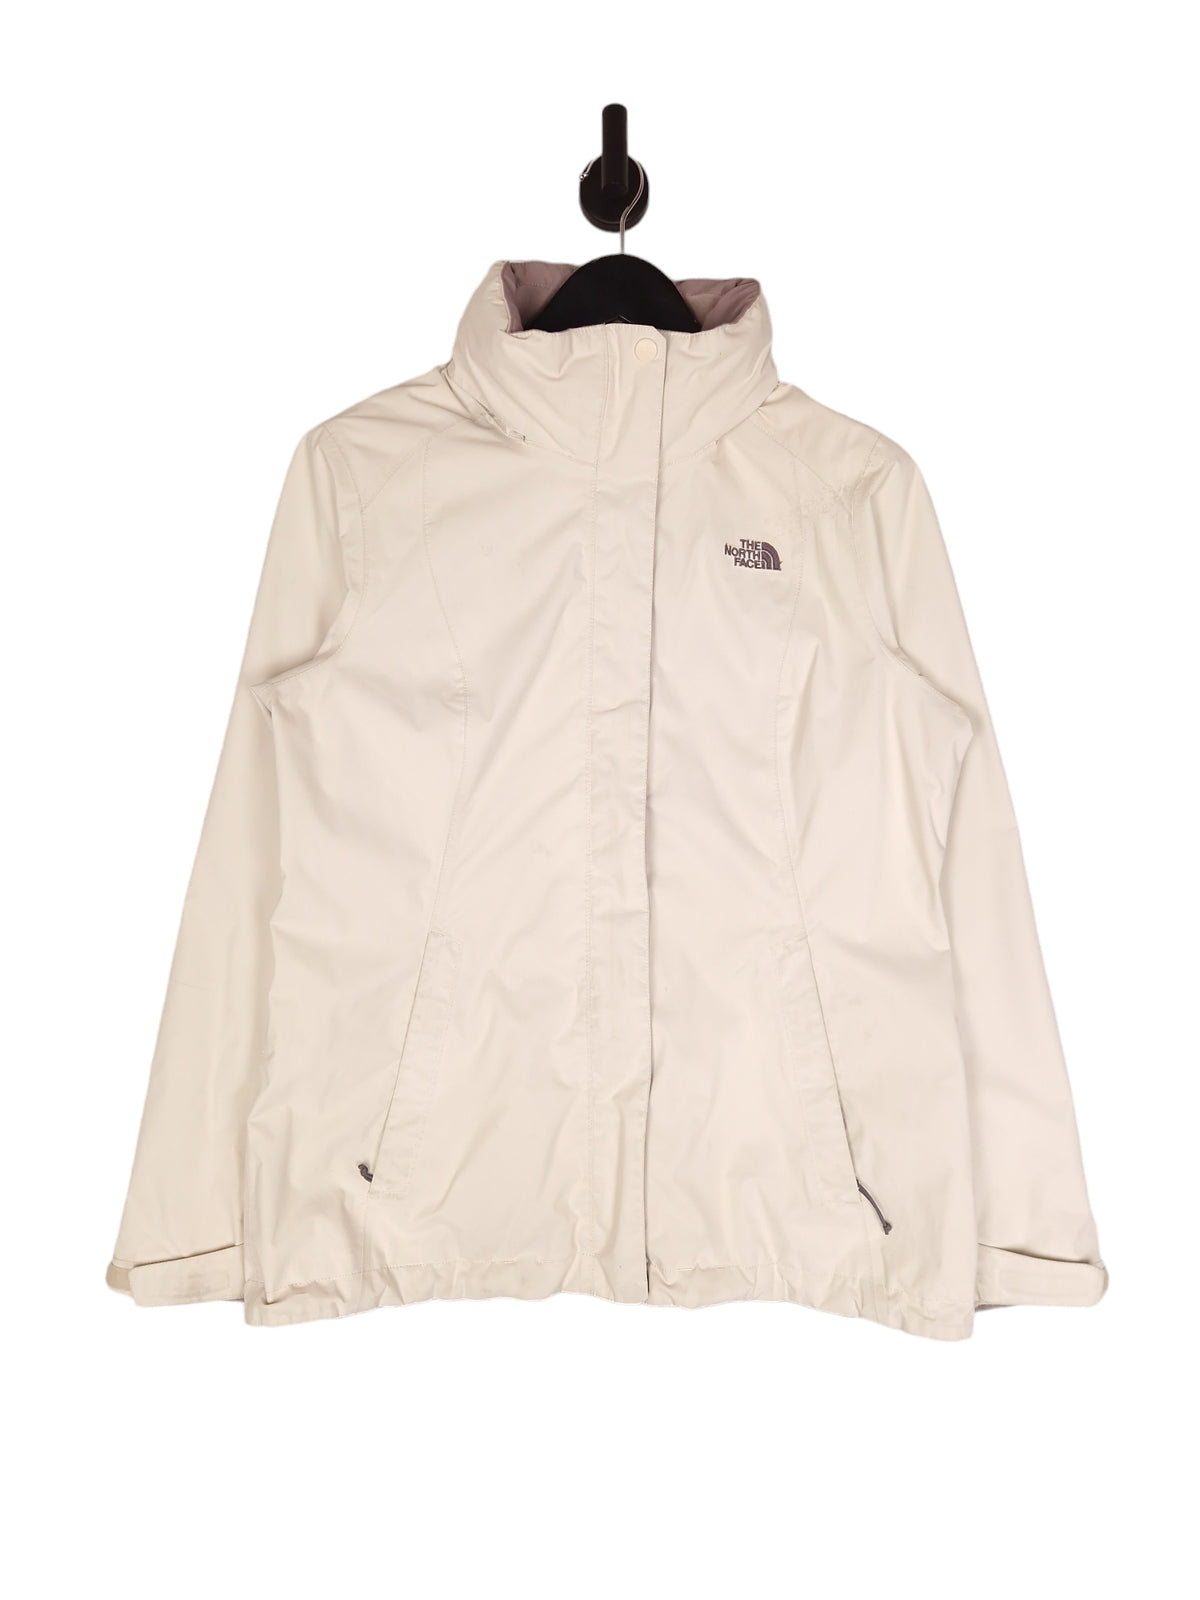 The North Face Dryvent Rain Jacket - Size L UK 12